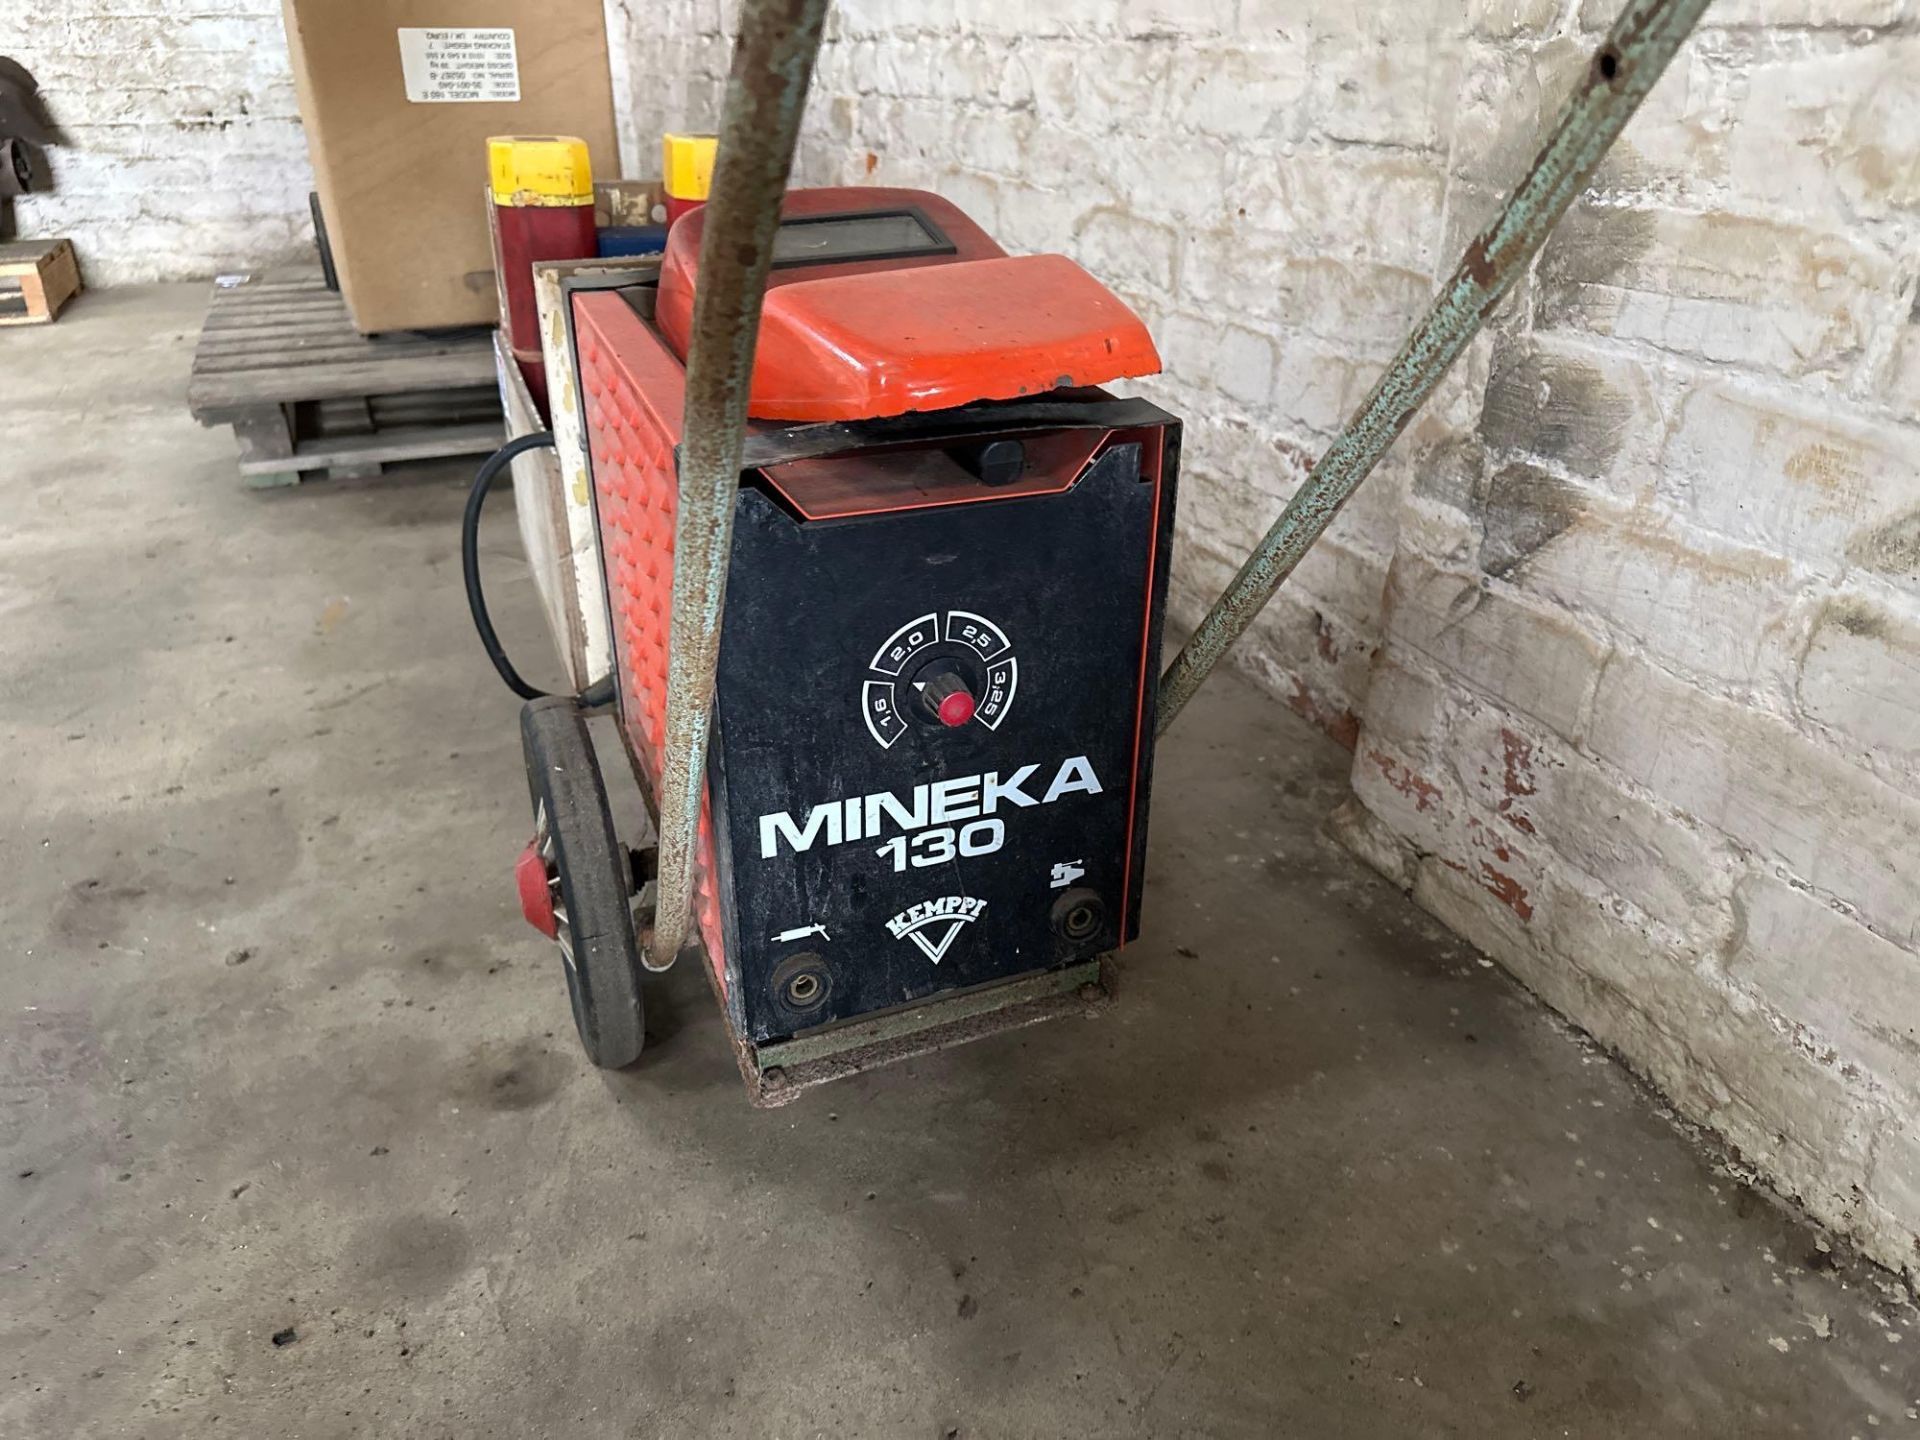 Mineka 130 stick welder, single phase Manual in the office - Image 2 of 3